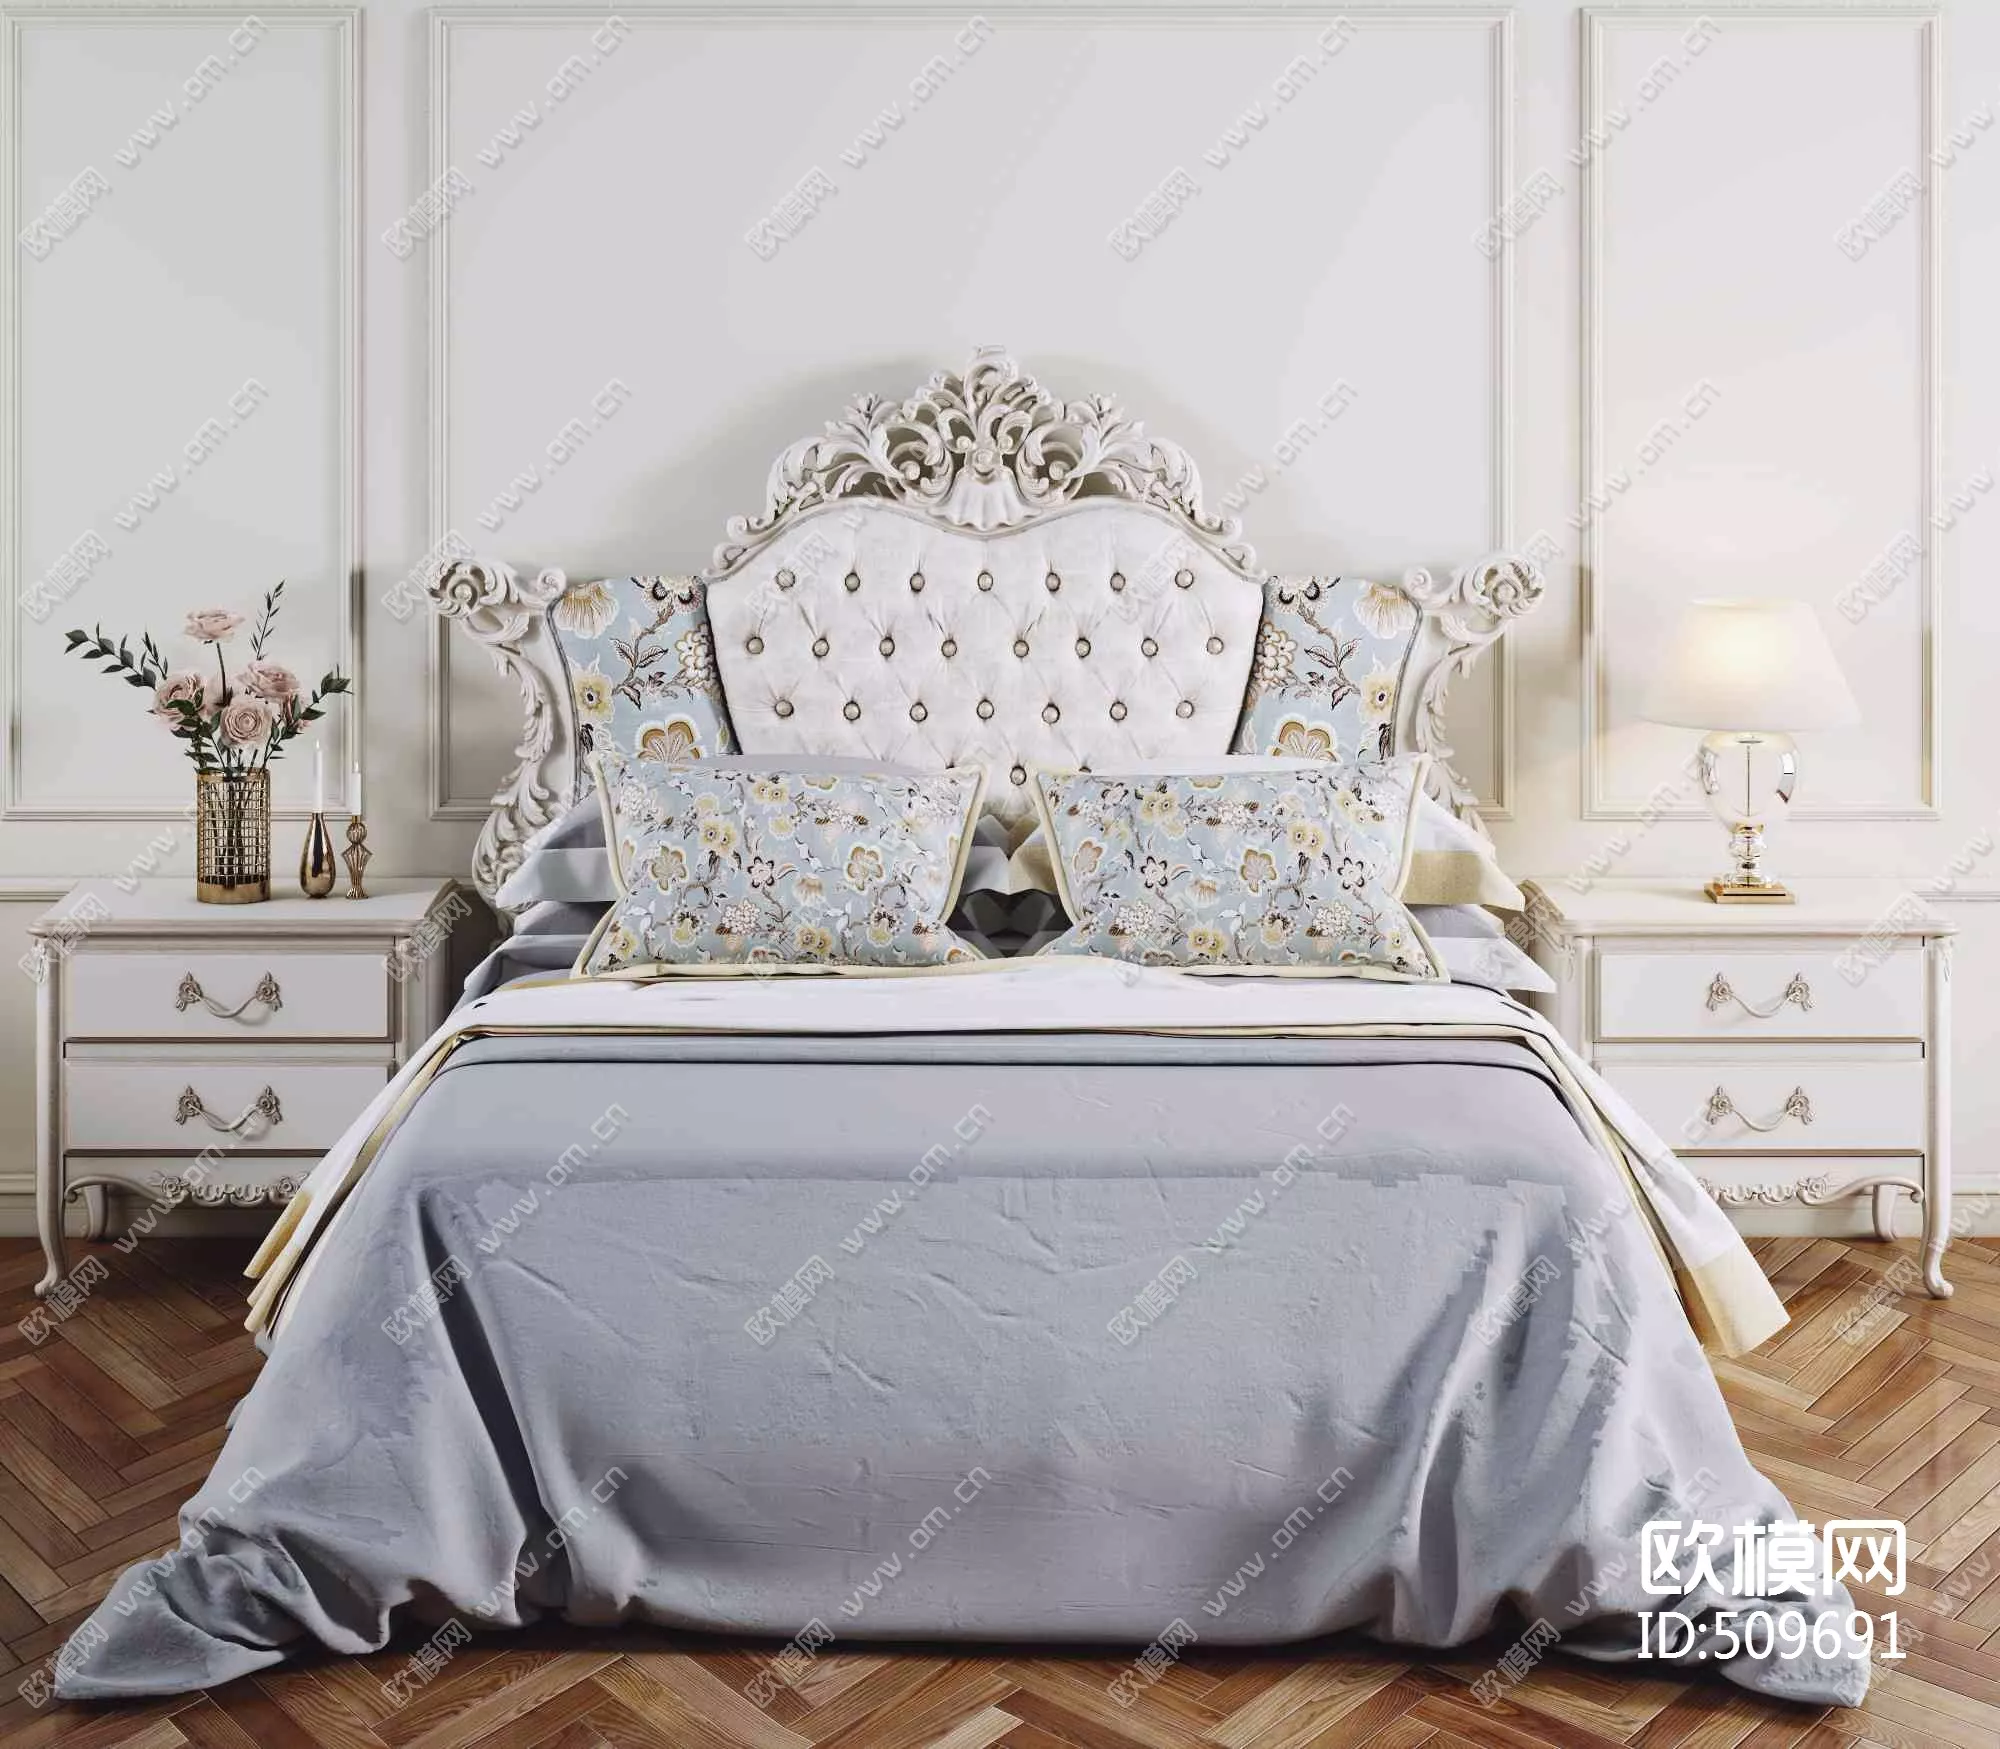 NEO CLASSIC BED - SKETCHUP 3D MODEL - VRAY OR ENSCAPE - ID16988